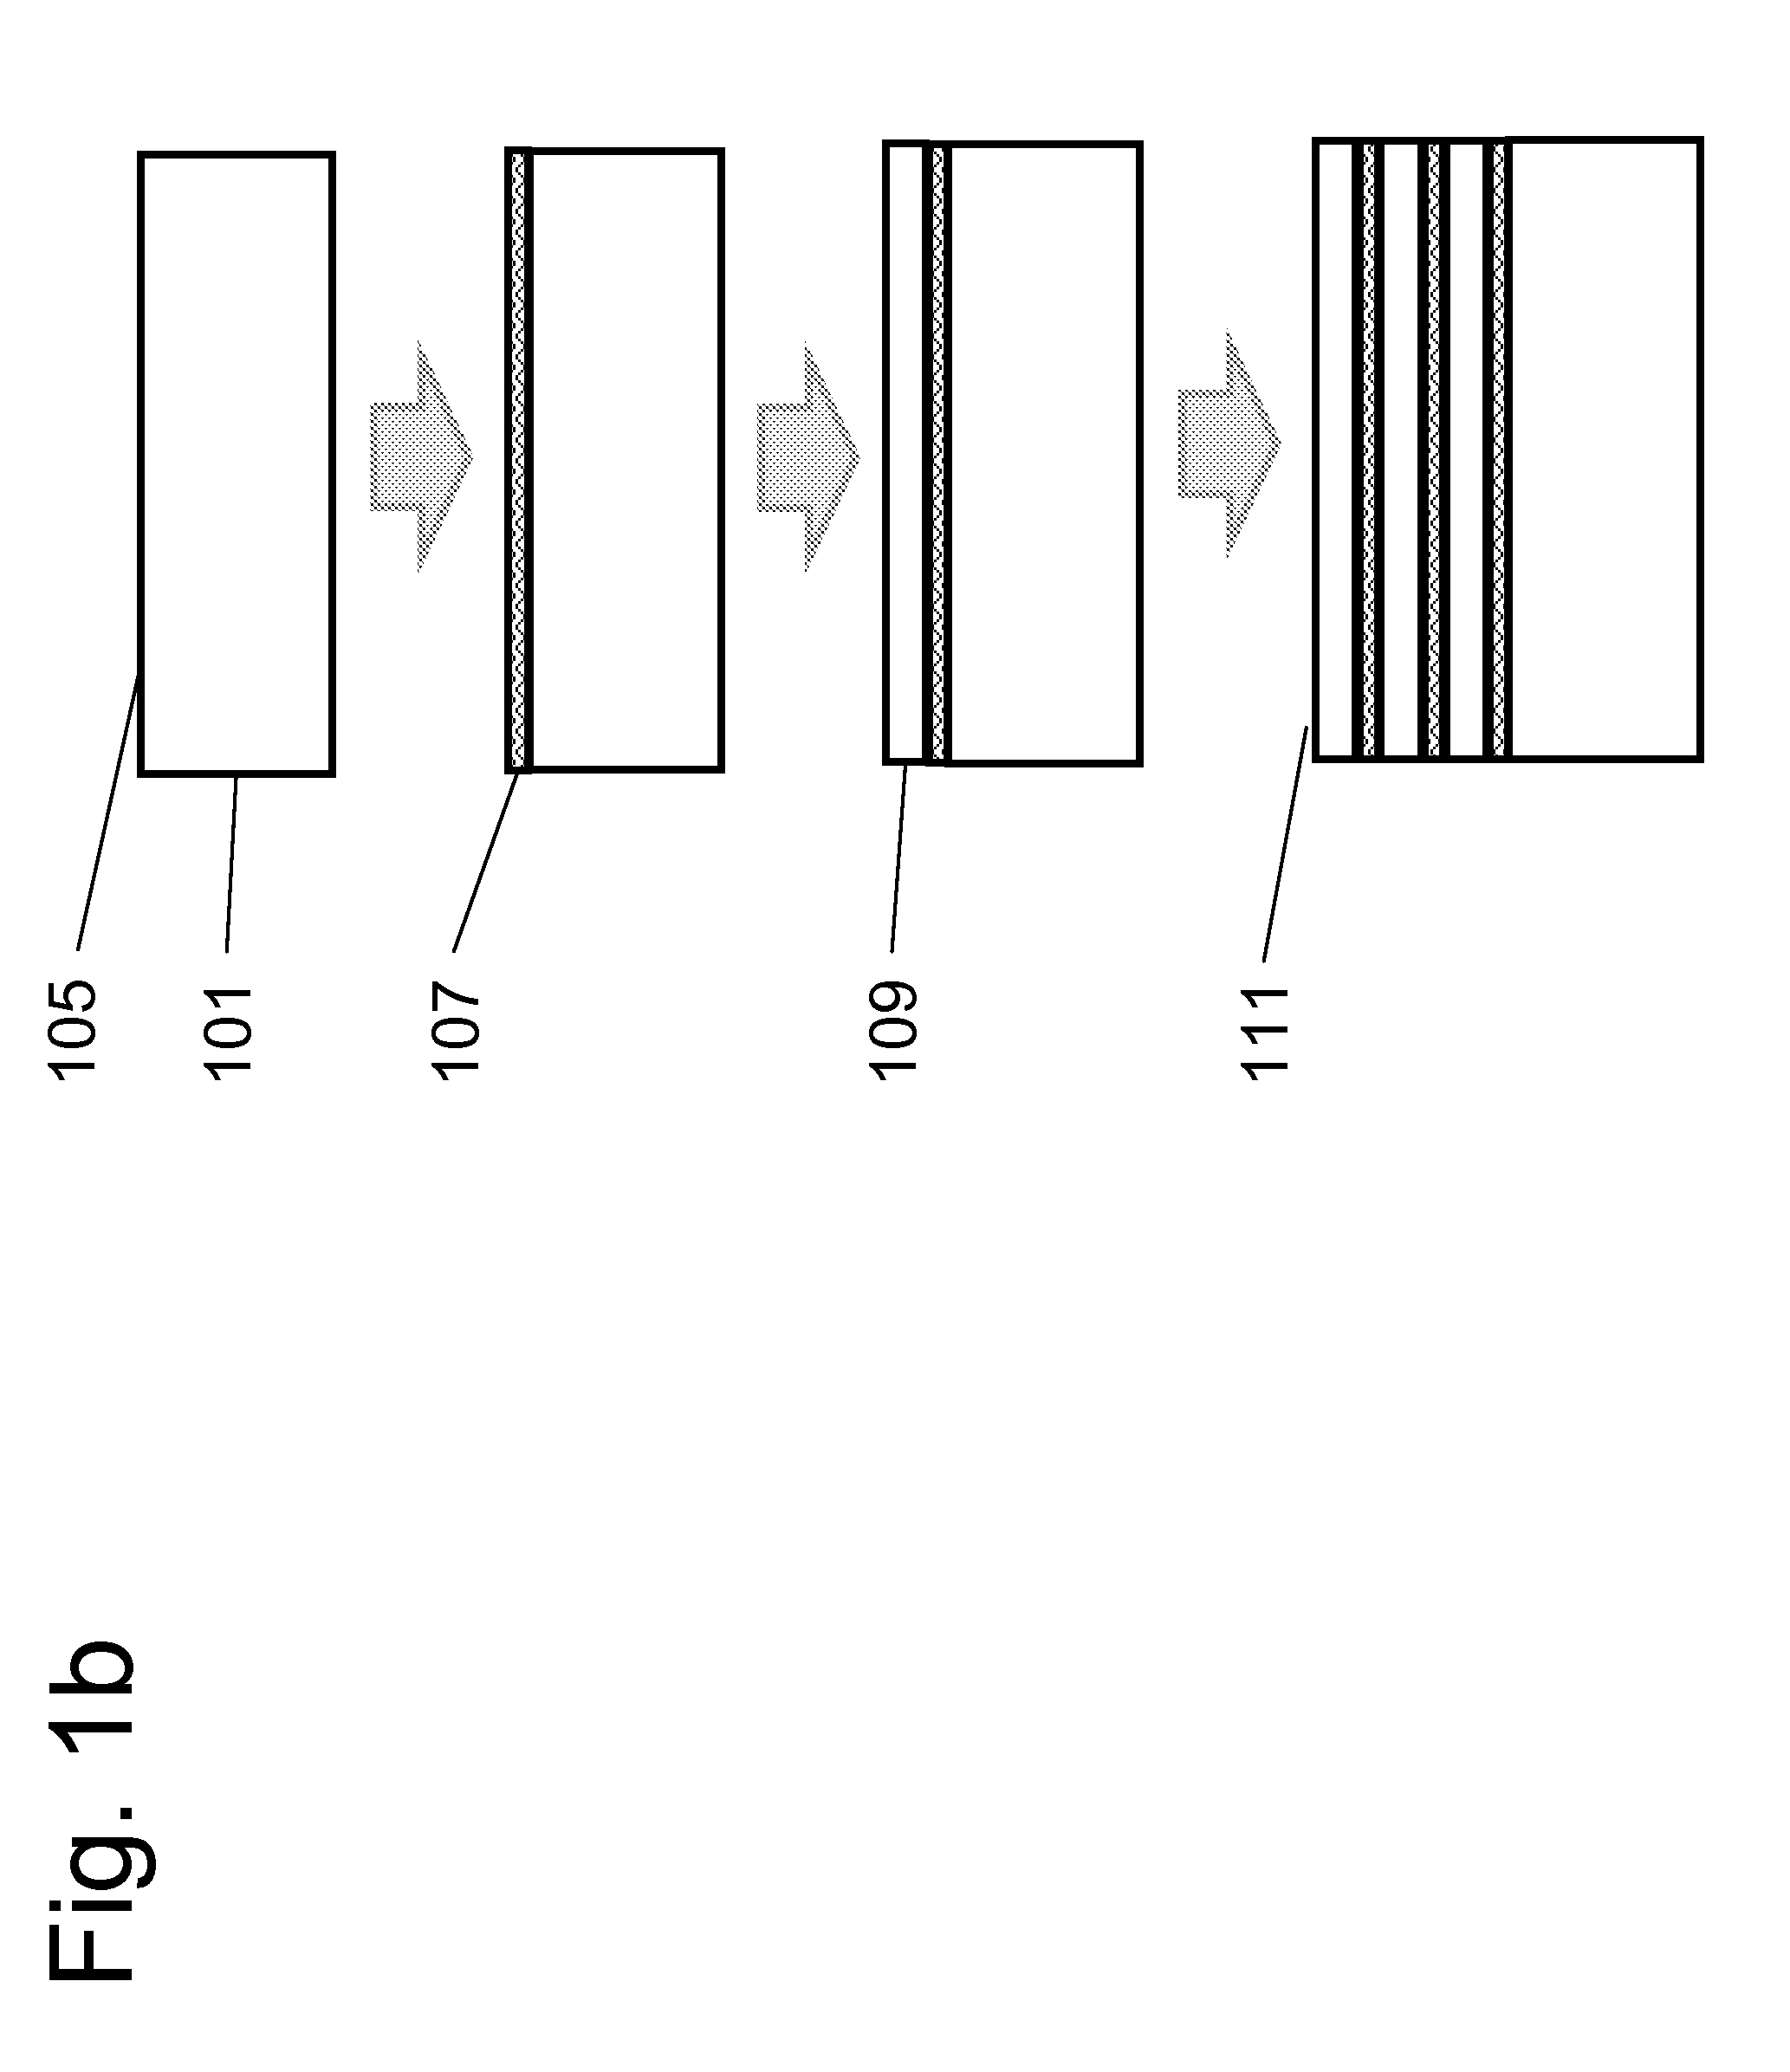 Large Area Nitride Crystal and Method for Making It